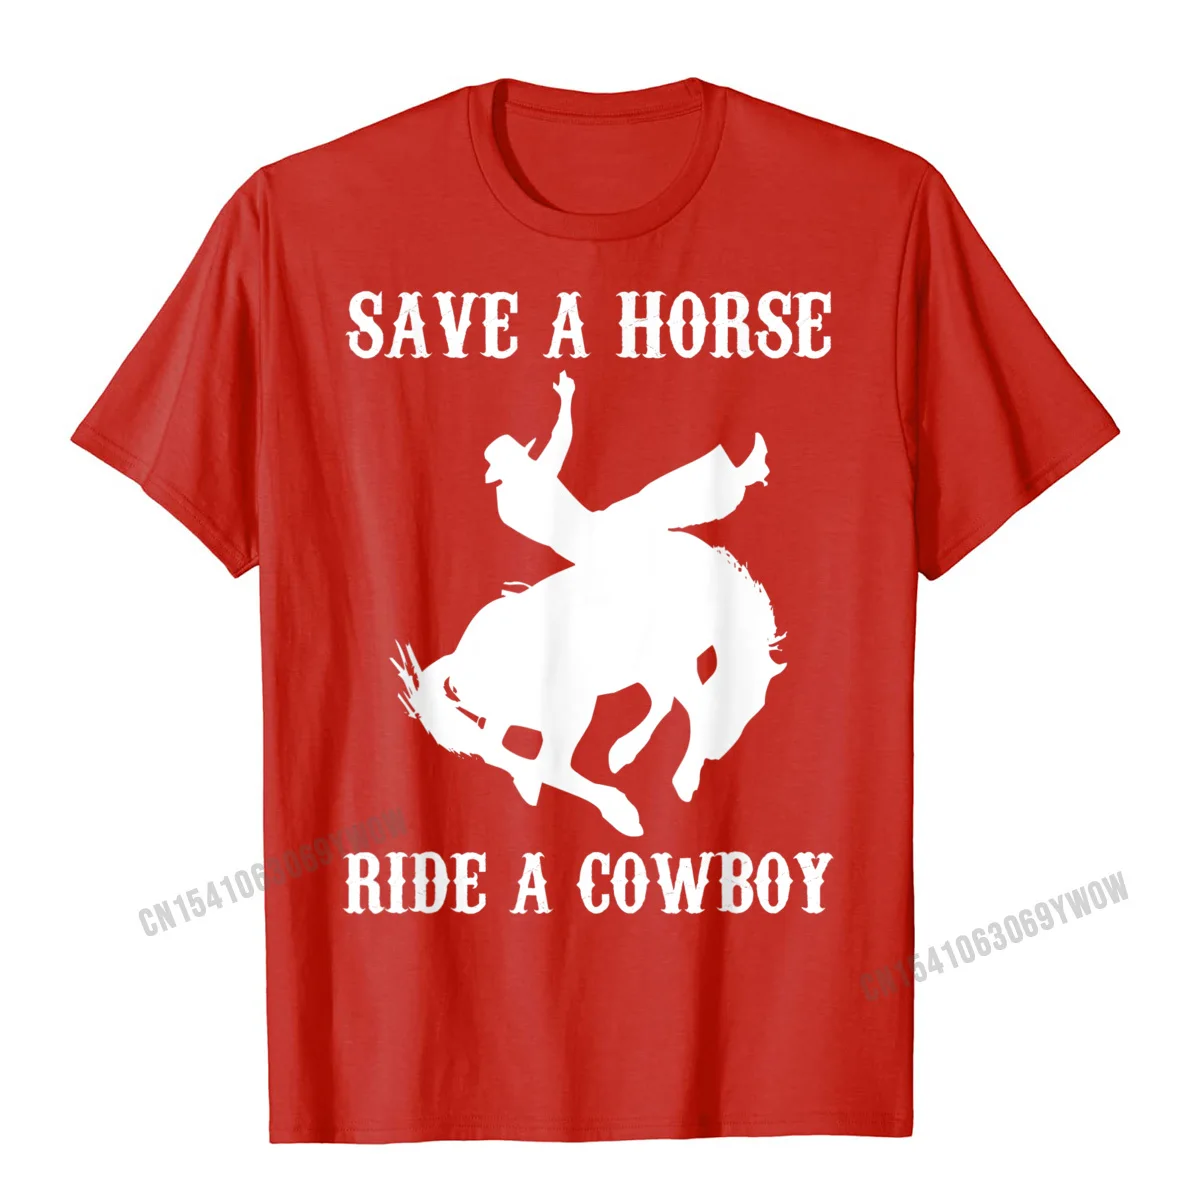 Leisure Cotton Normal Tops Tees Hip Hop Short Sleeve Young Tshirts Fashionable Father Day T Shirt O Neck Drop Shipping Save A Horse Ride A Cowboy T-Shirt funny saying sarcastic__971 red